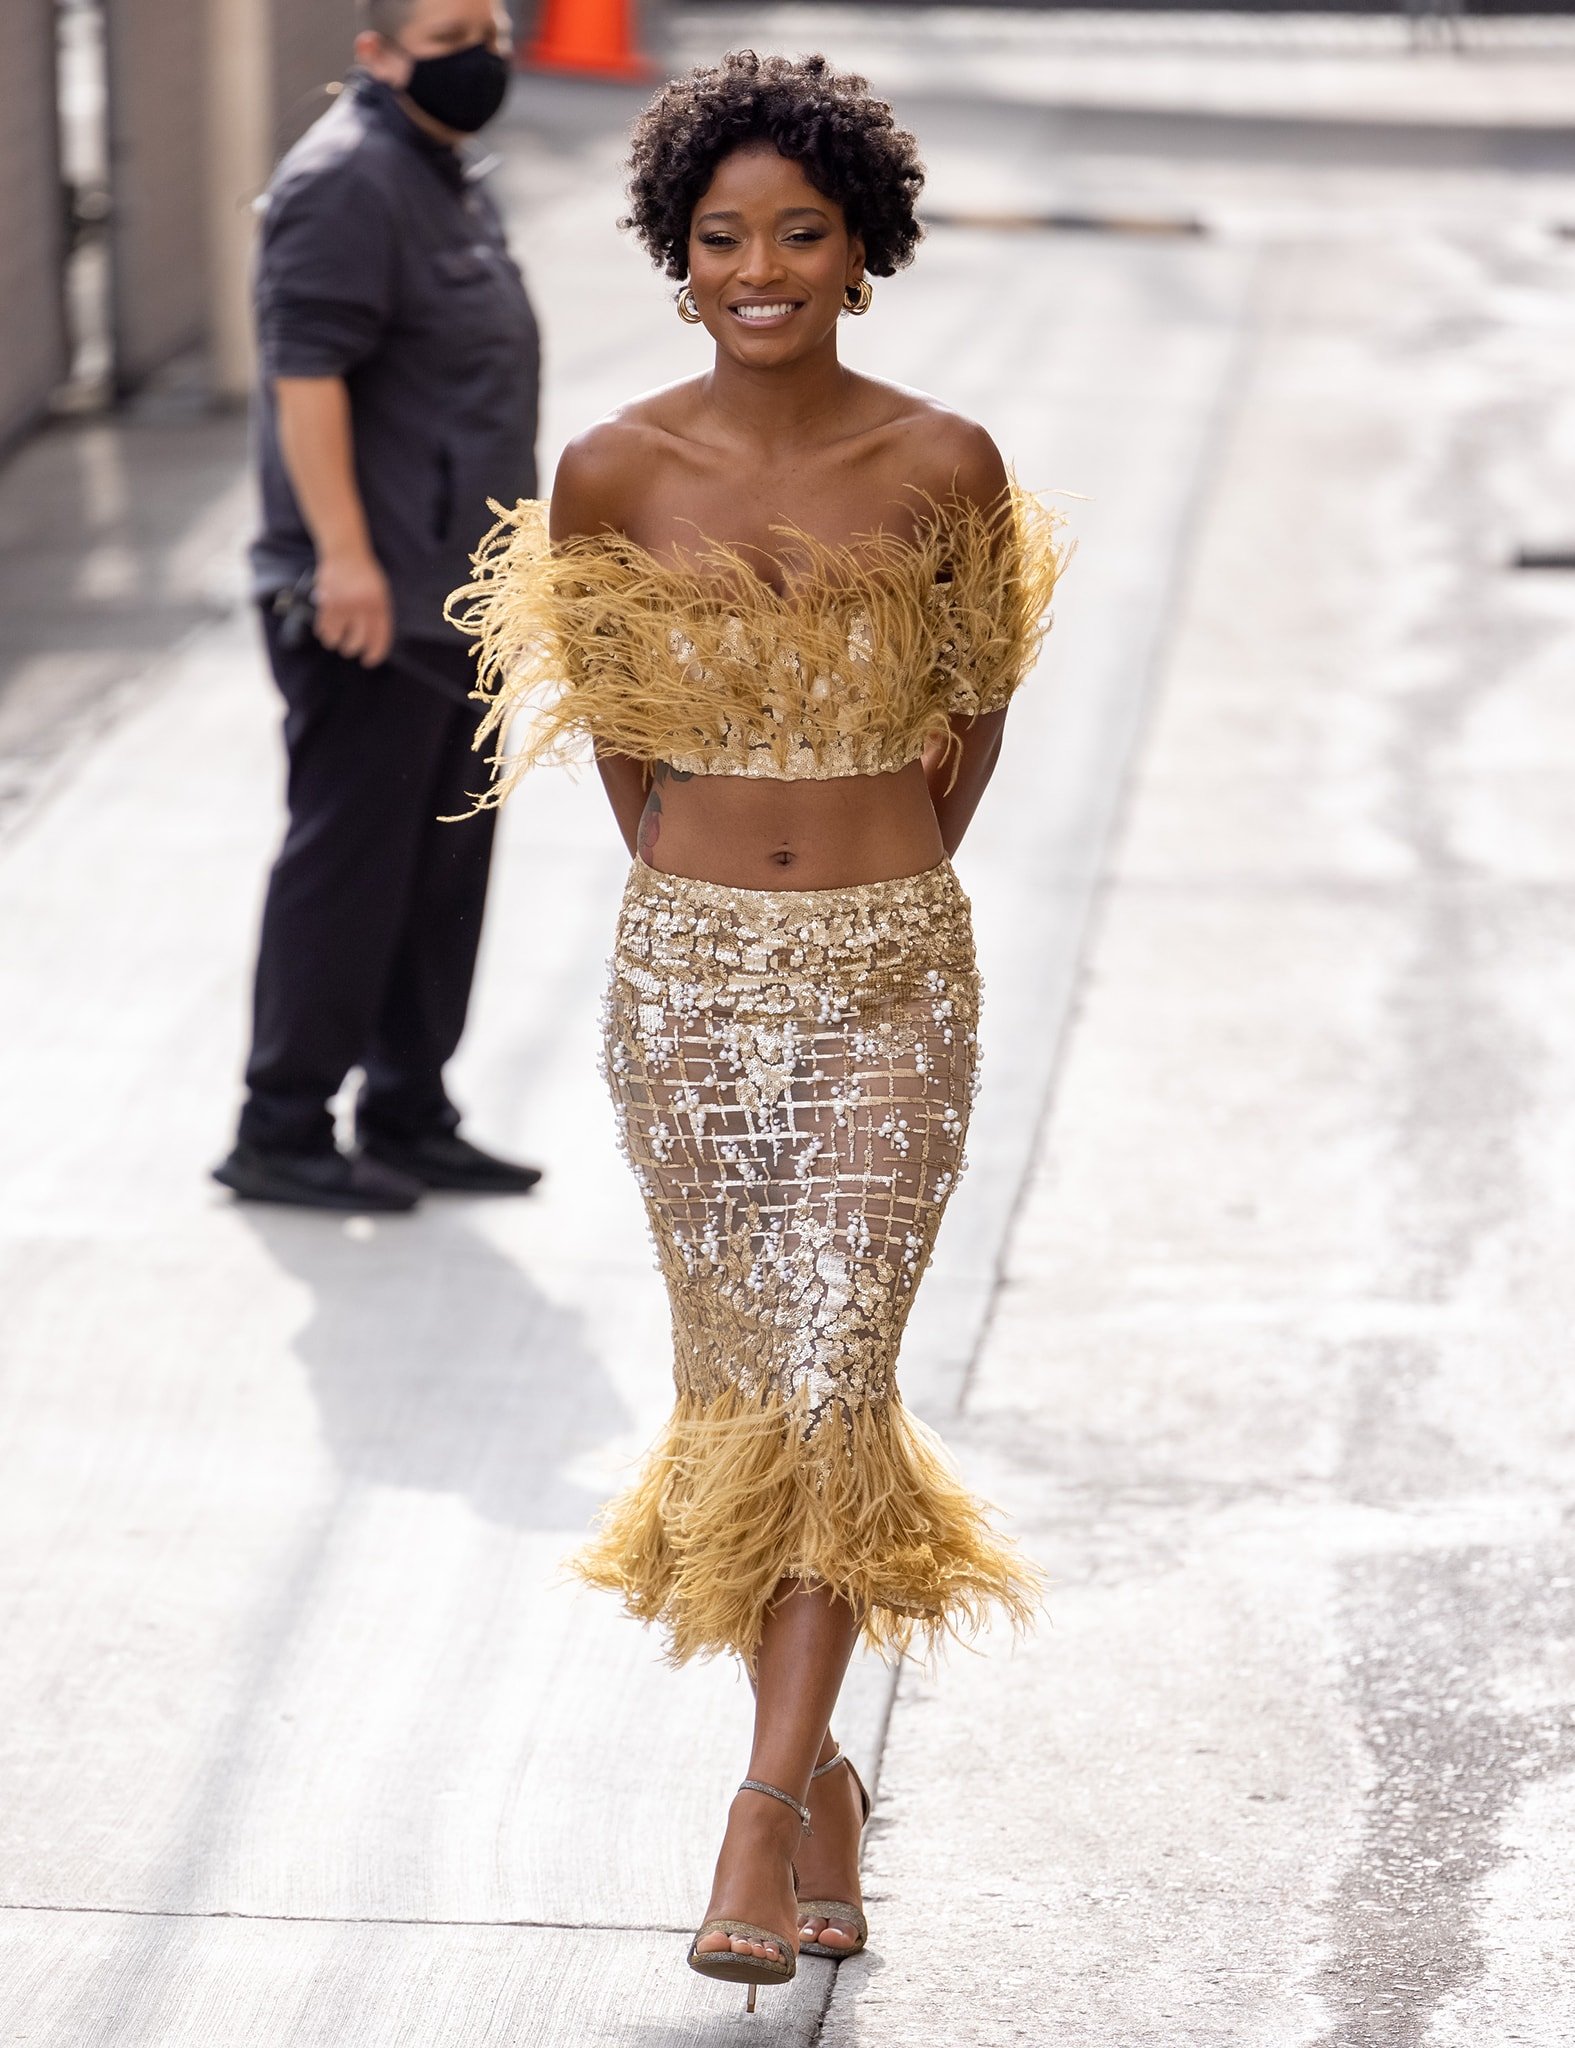 Keke Palmer's outfit features a gold sequined crop top and a matching mesh midi skirt with feather accents